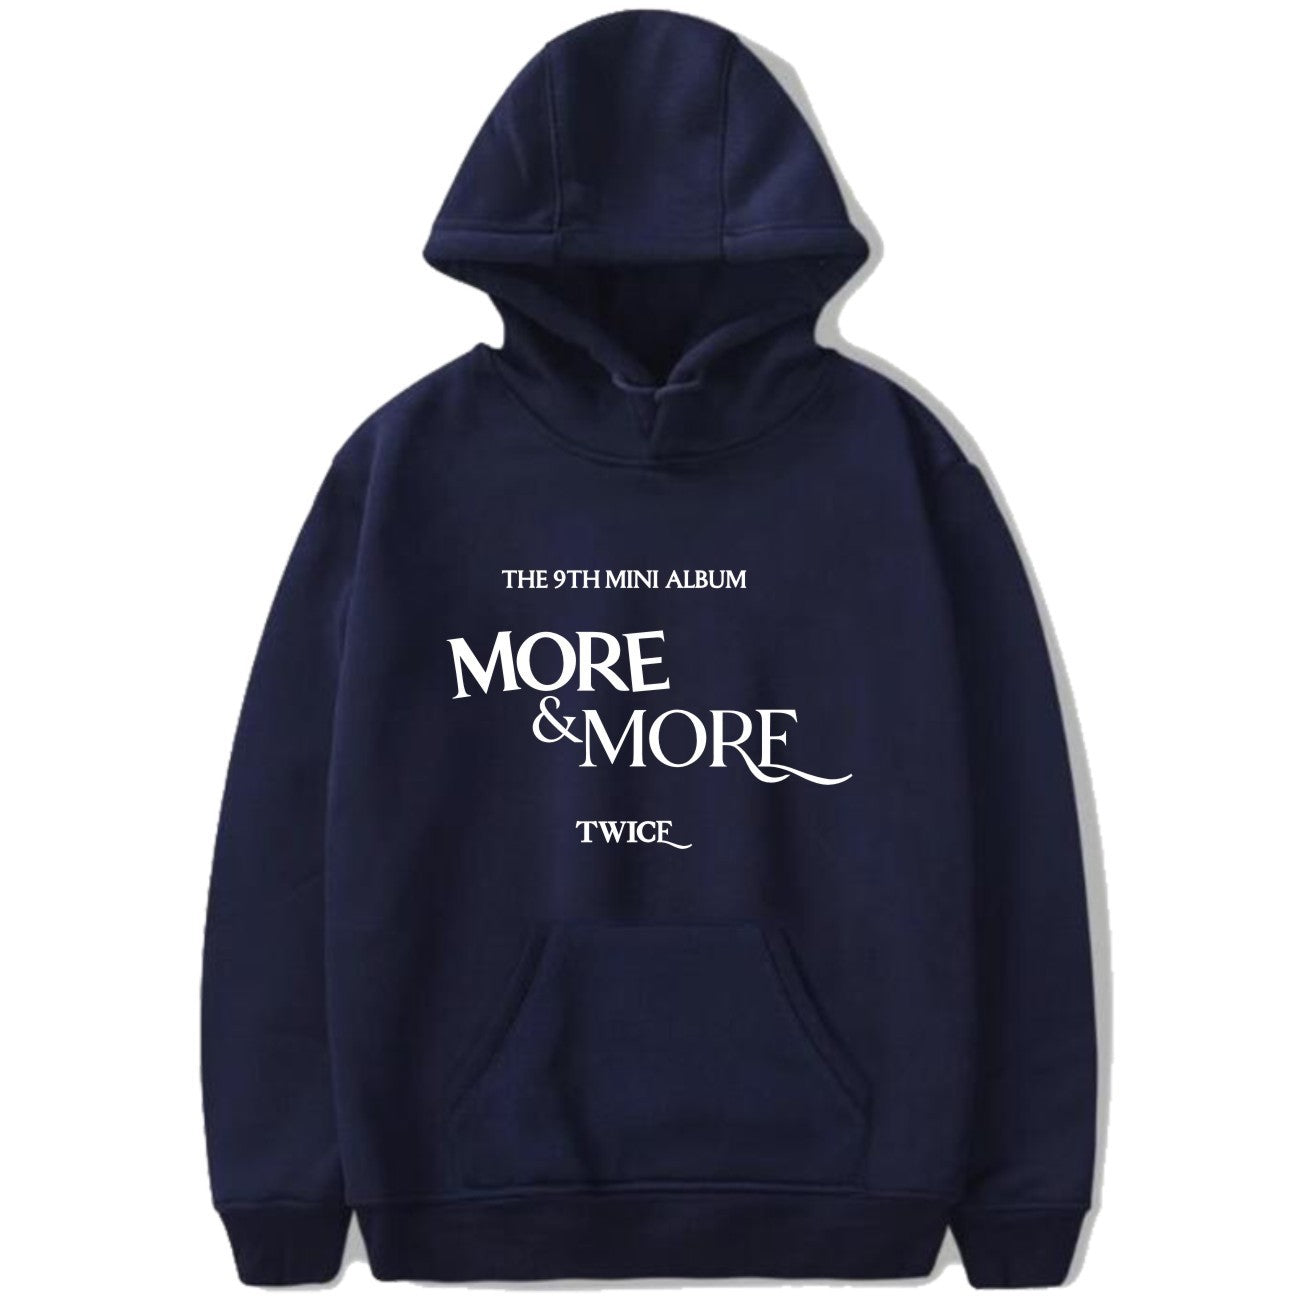 Singing Clothing Pullover Sweater Men And Women Hoodie Jacket